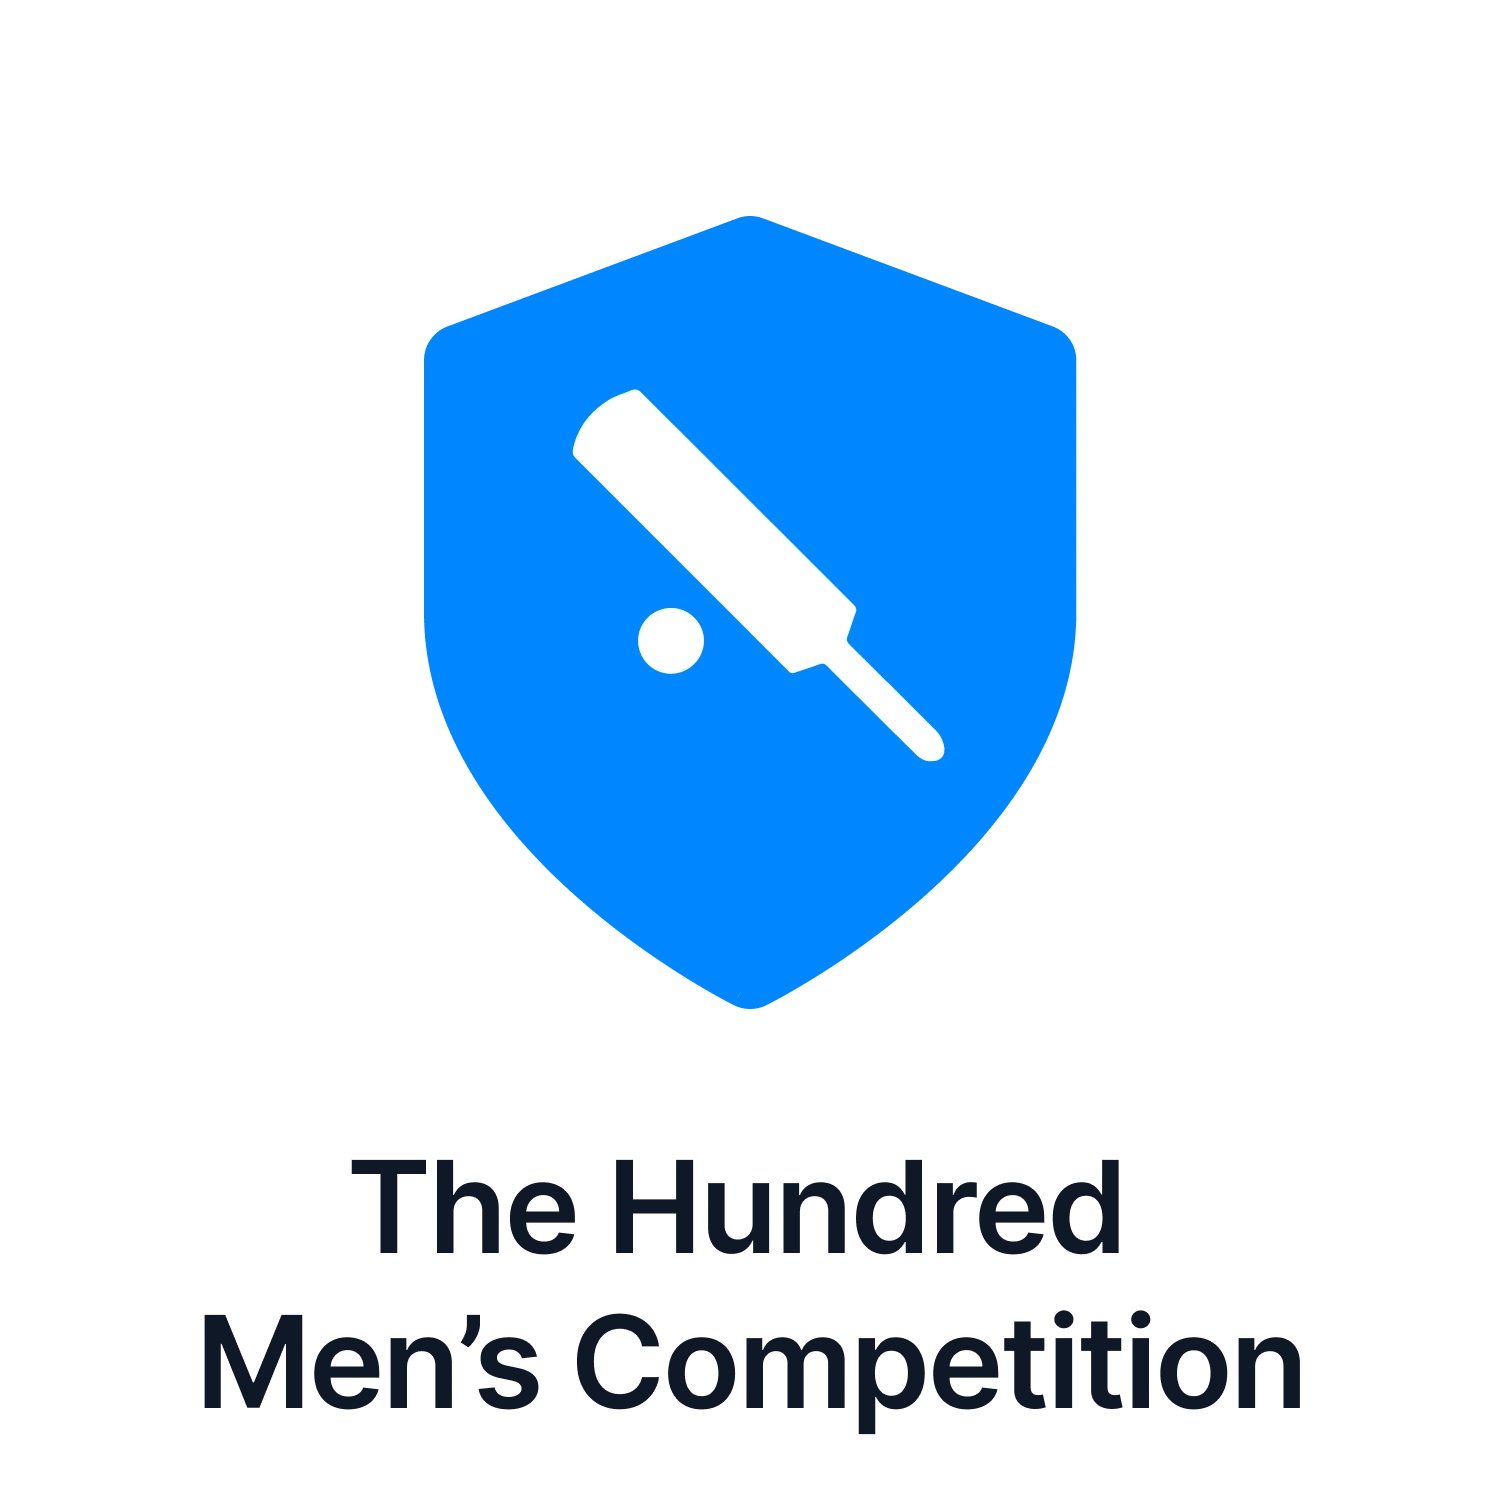 Read more about our predictions on The Hundred Men's Competition matches.